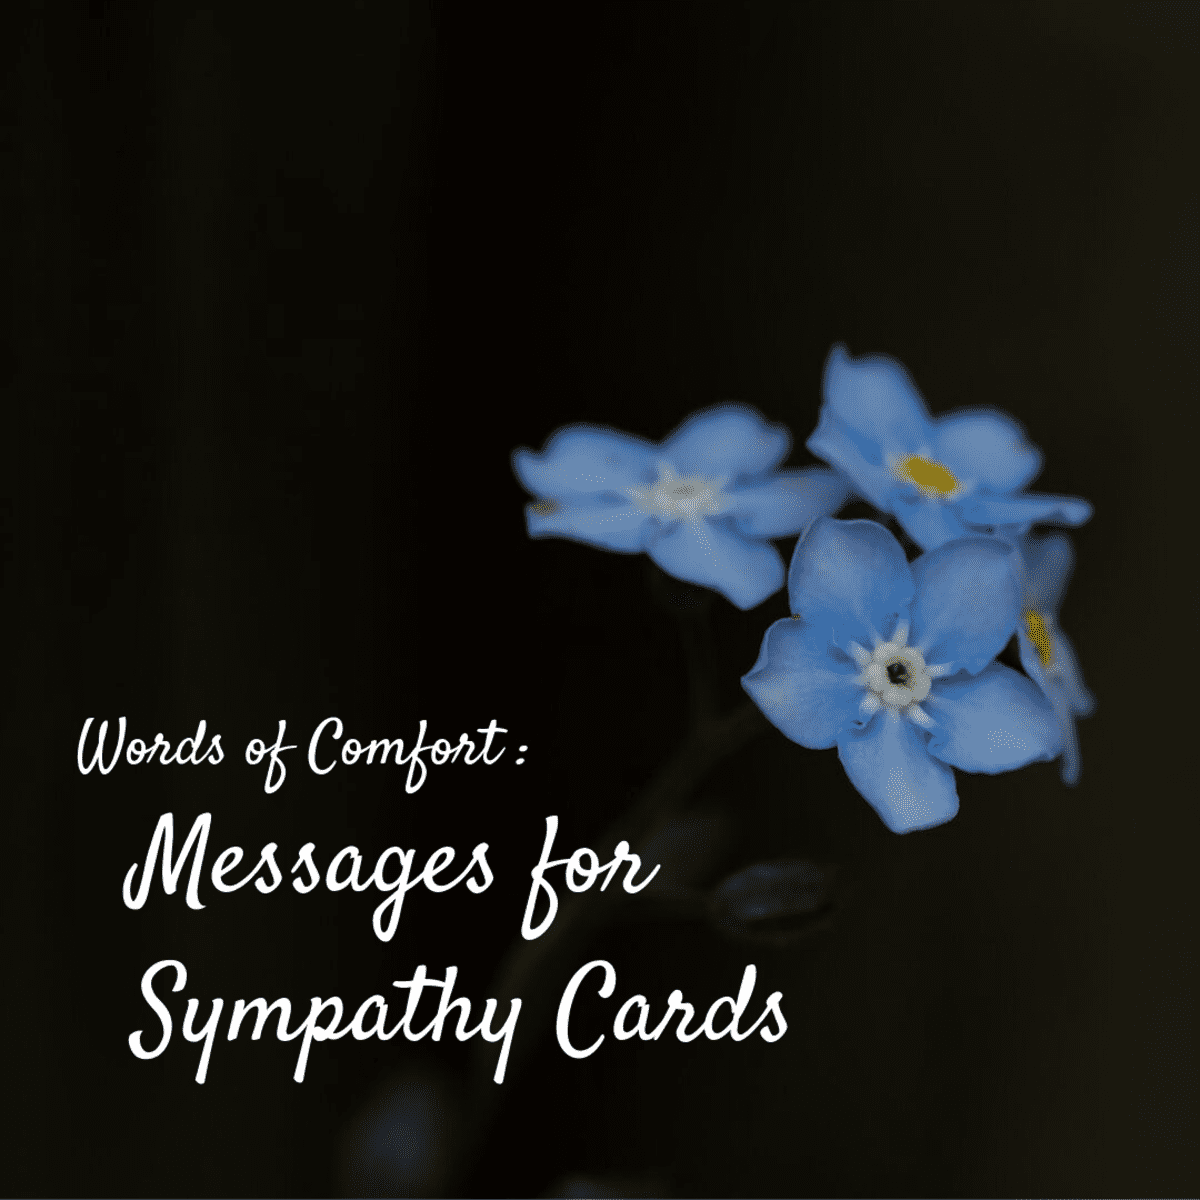 Beautifully Worded On The Sad Loss Of Your Daughter Sympathy Card